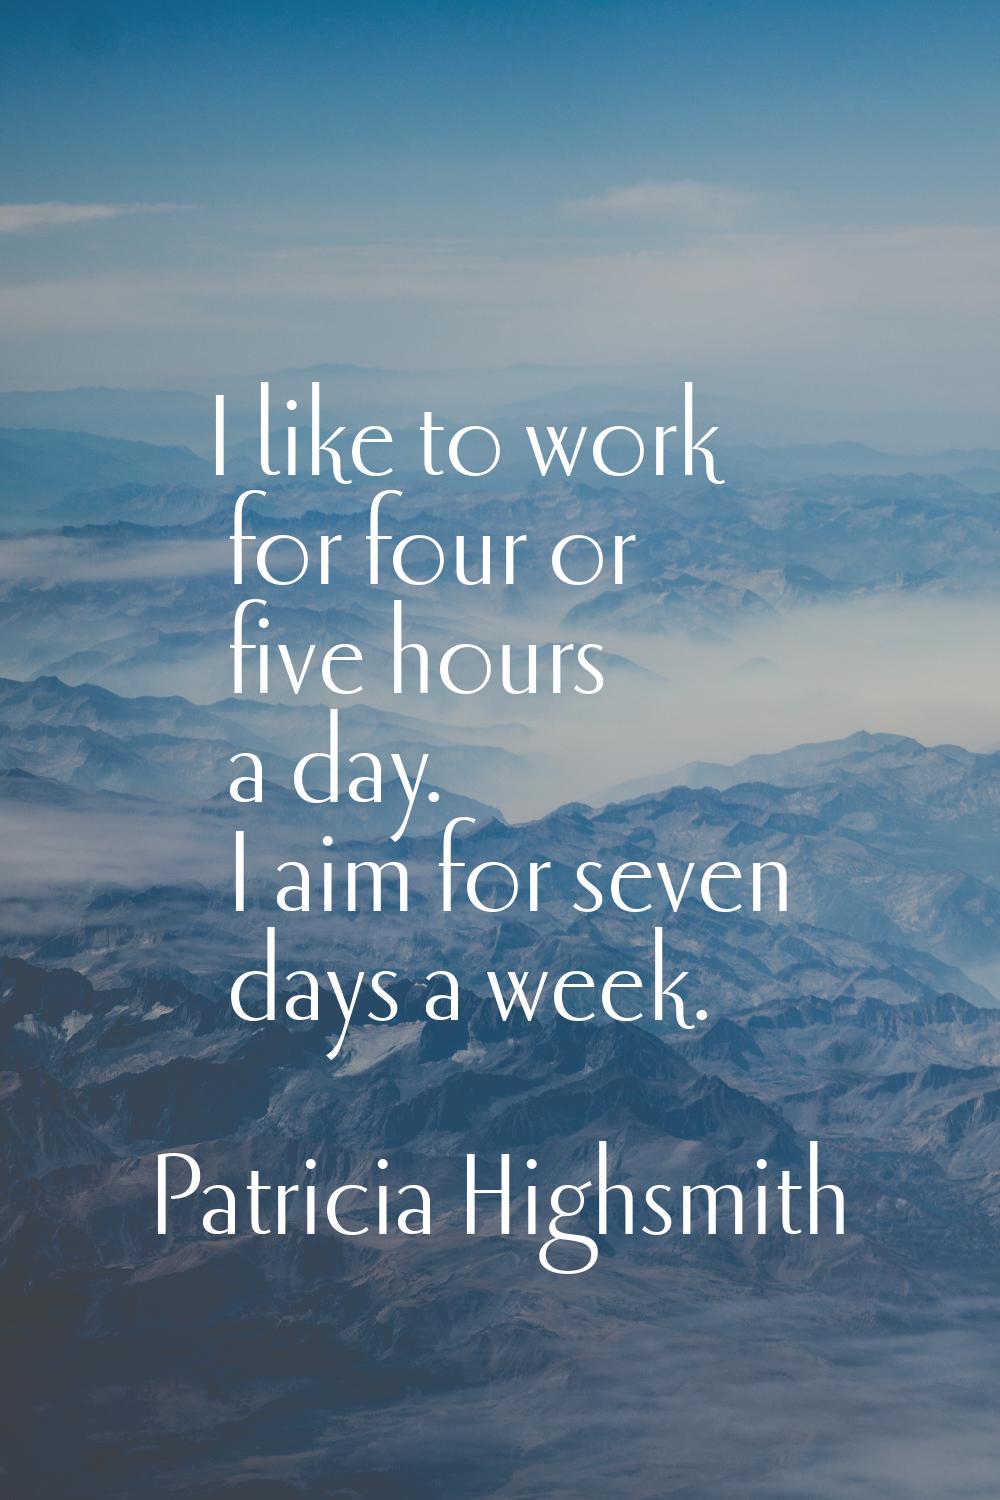 I like to work for four or five hours a day. I aim for seven days a week.